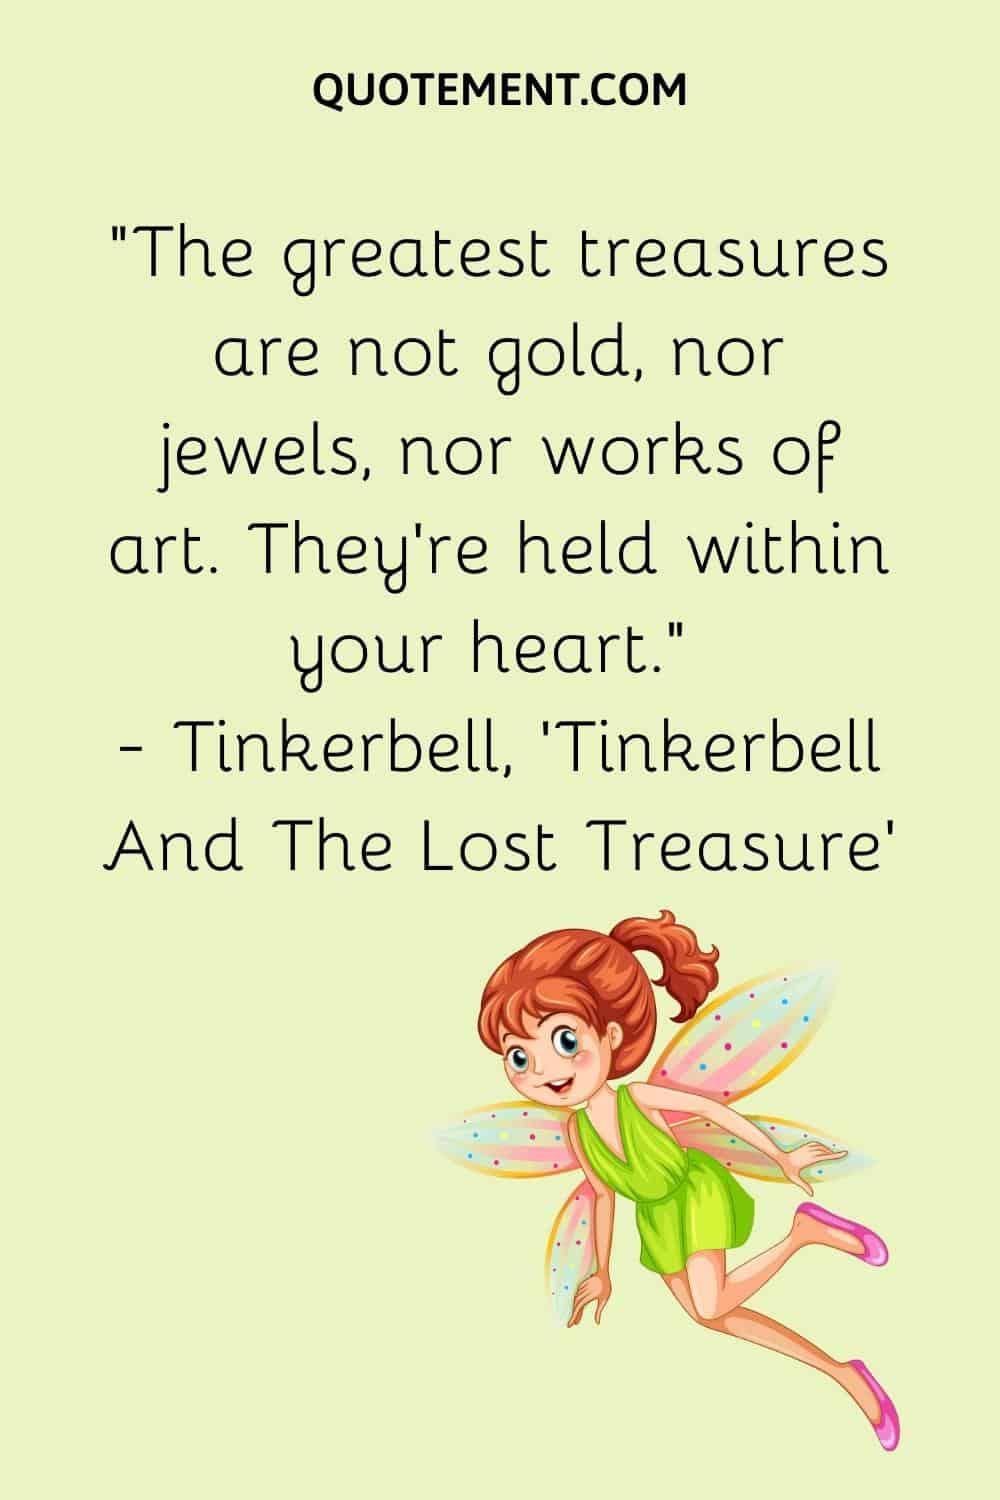 The greatest treasures are not gold, nor jewels